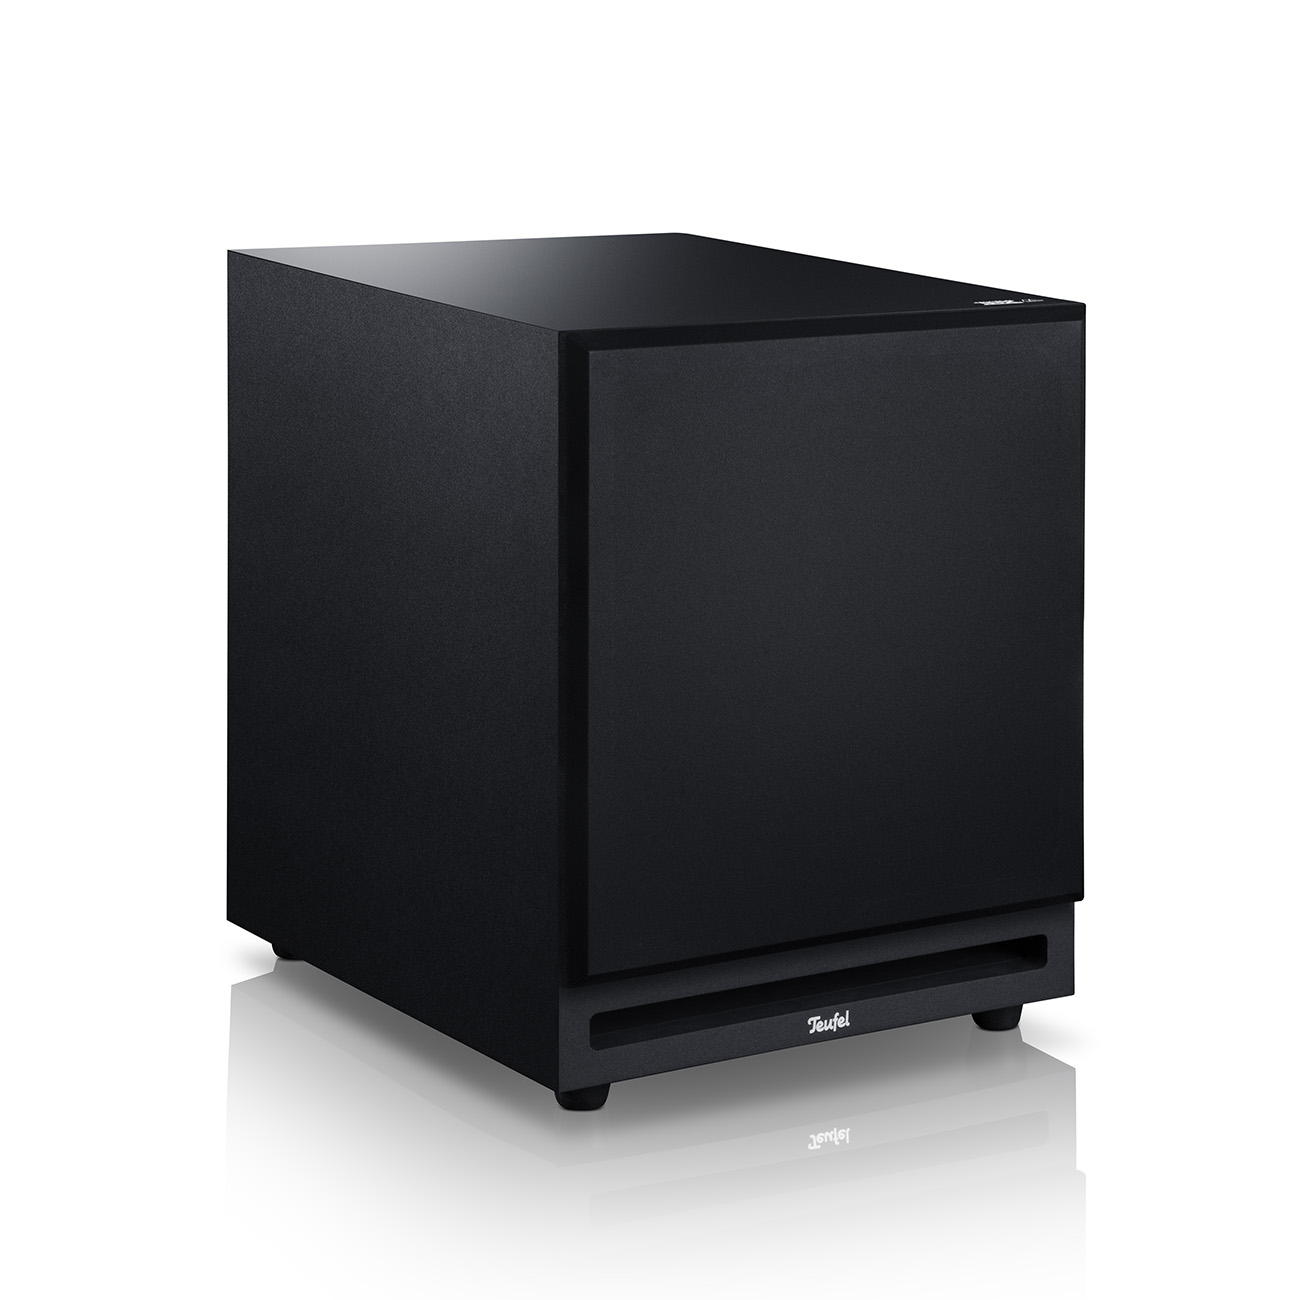 system-6-thx-select-sub-front-angled-black-cover-1300x1300x72.jpg